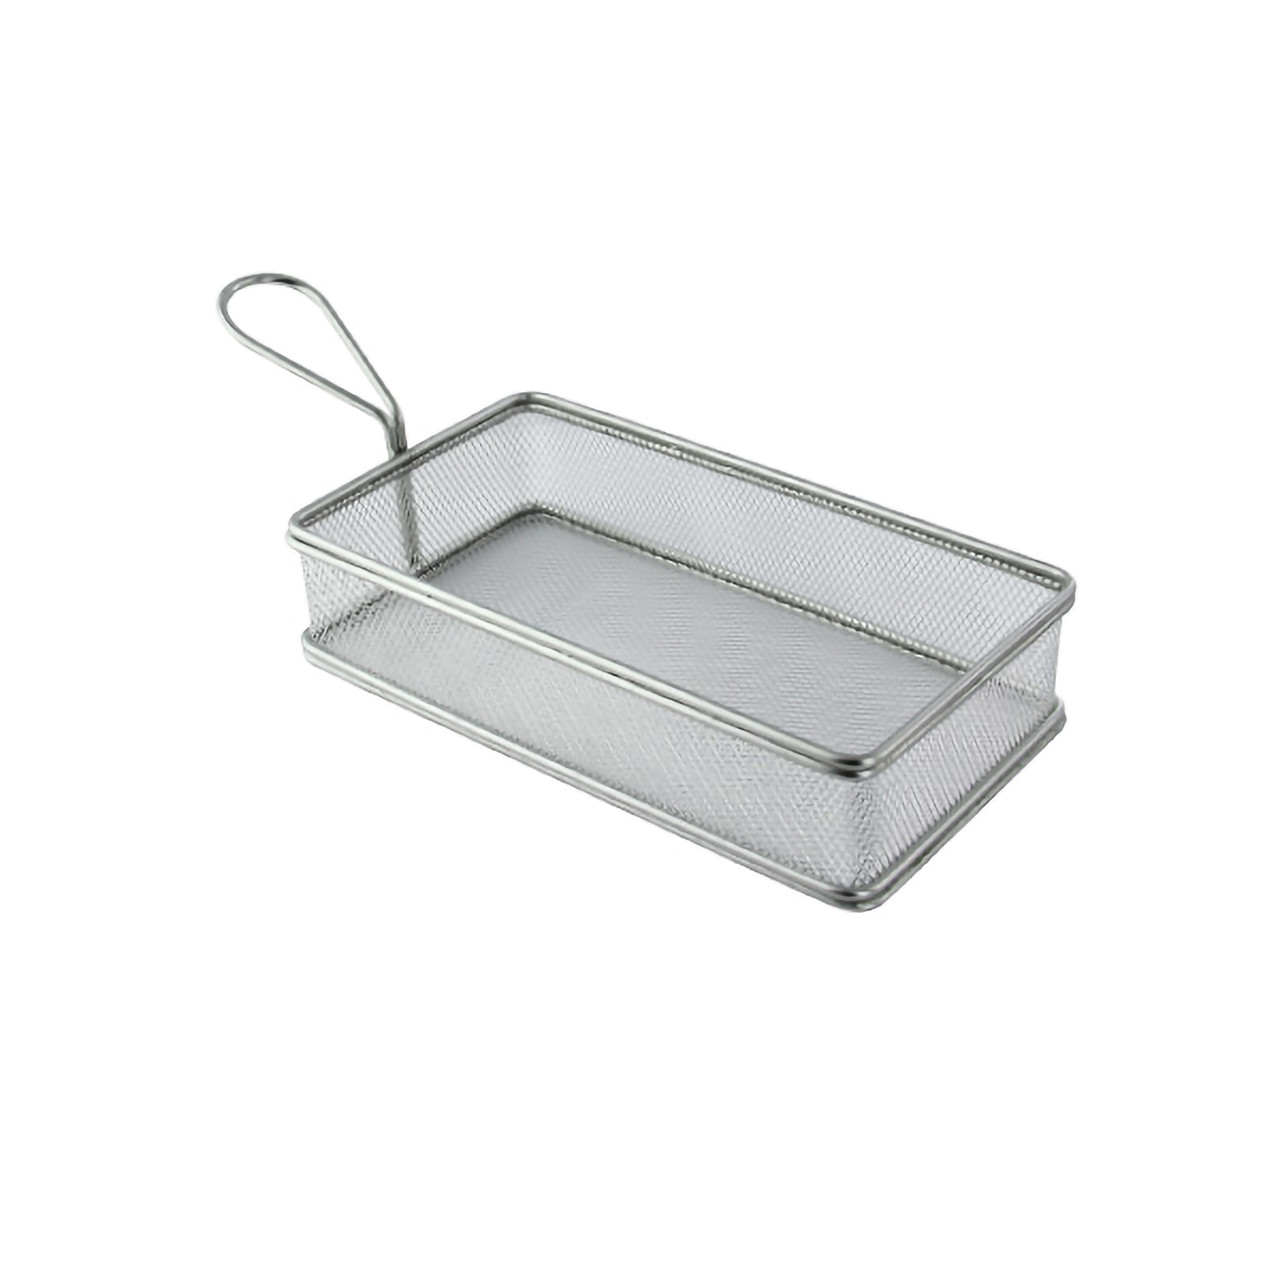 Rectangular Stainless Steel Serving Fry Basket -19oz L:8.7 x W:4.75 x H:1.35in